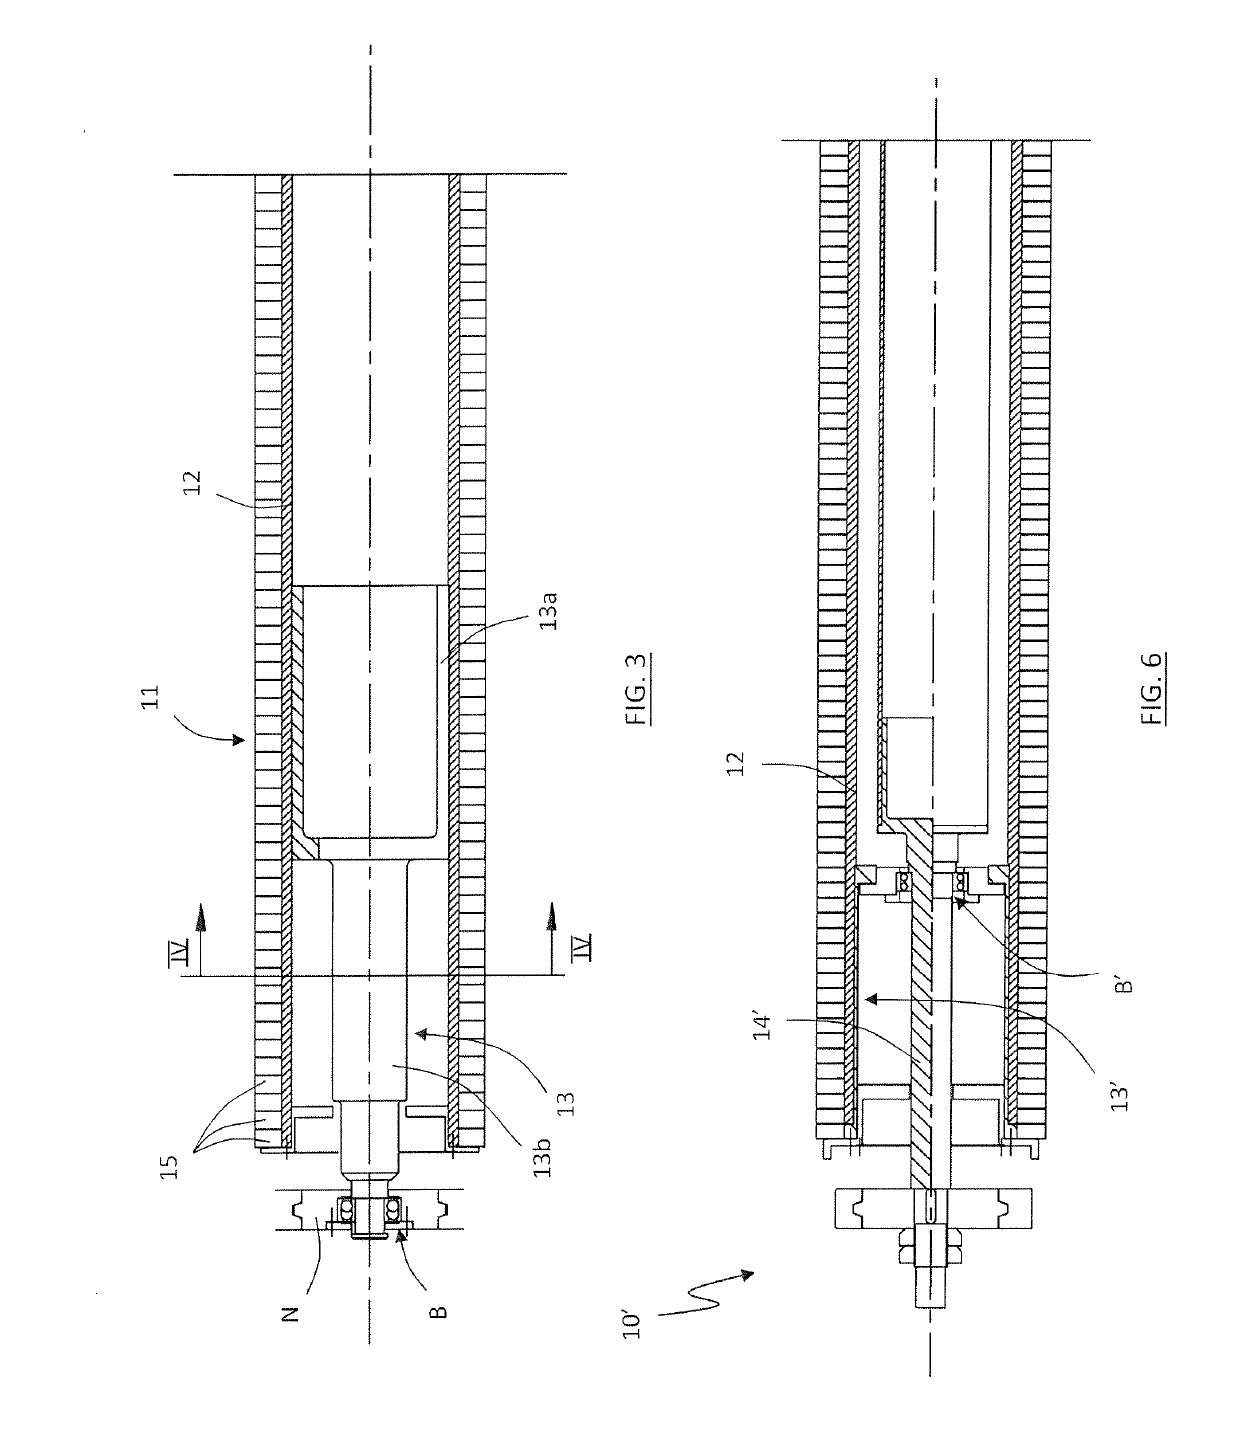 Pressing Roller for the Processing of Web Paper Material